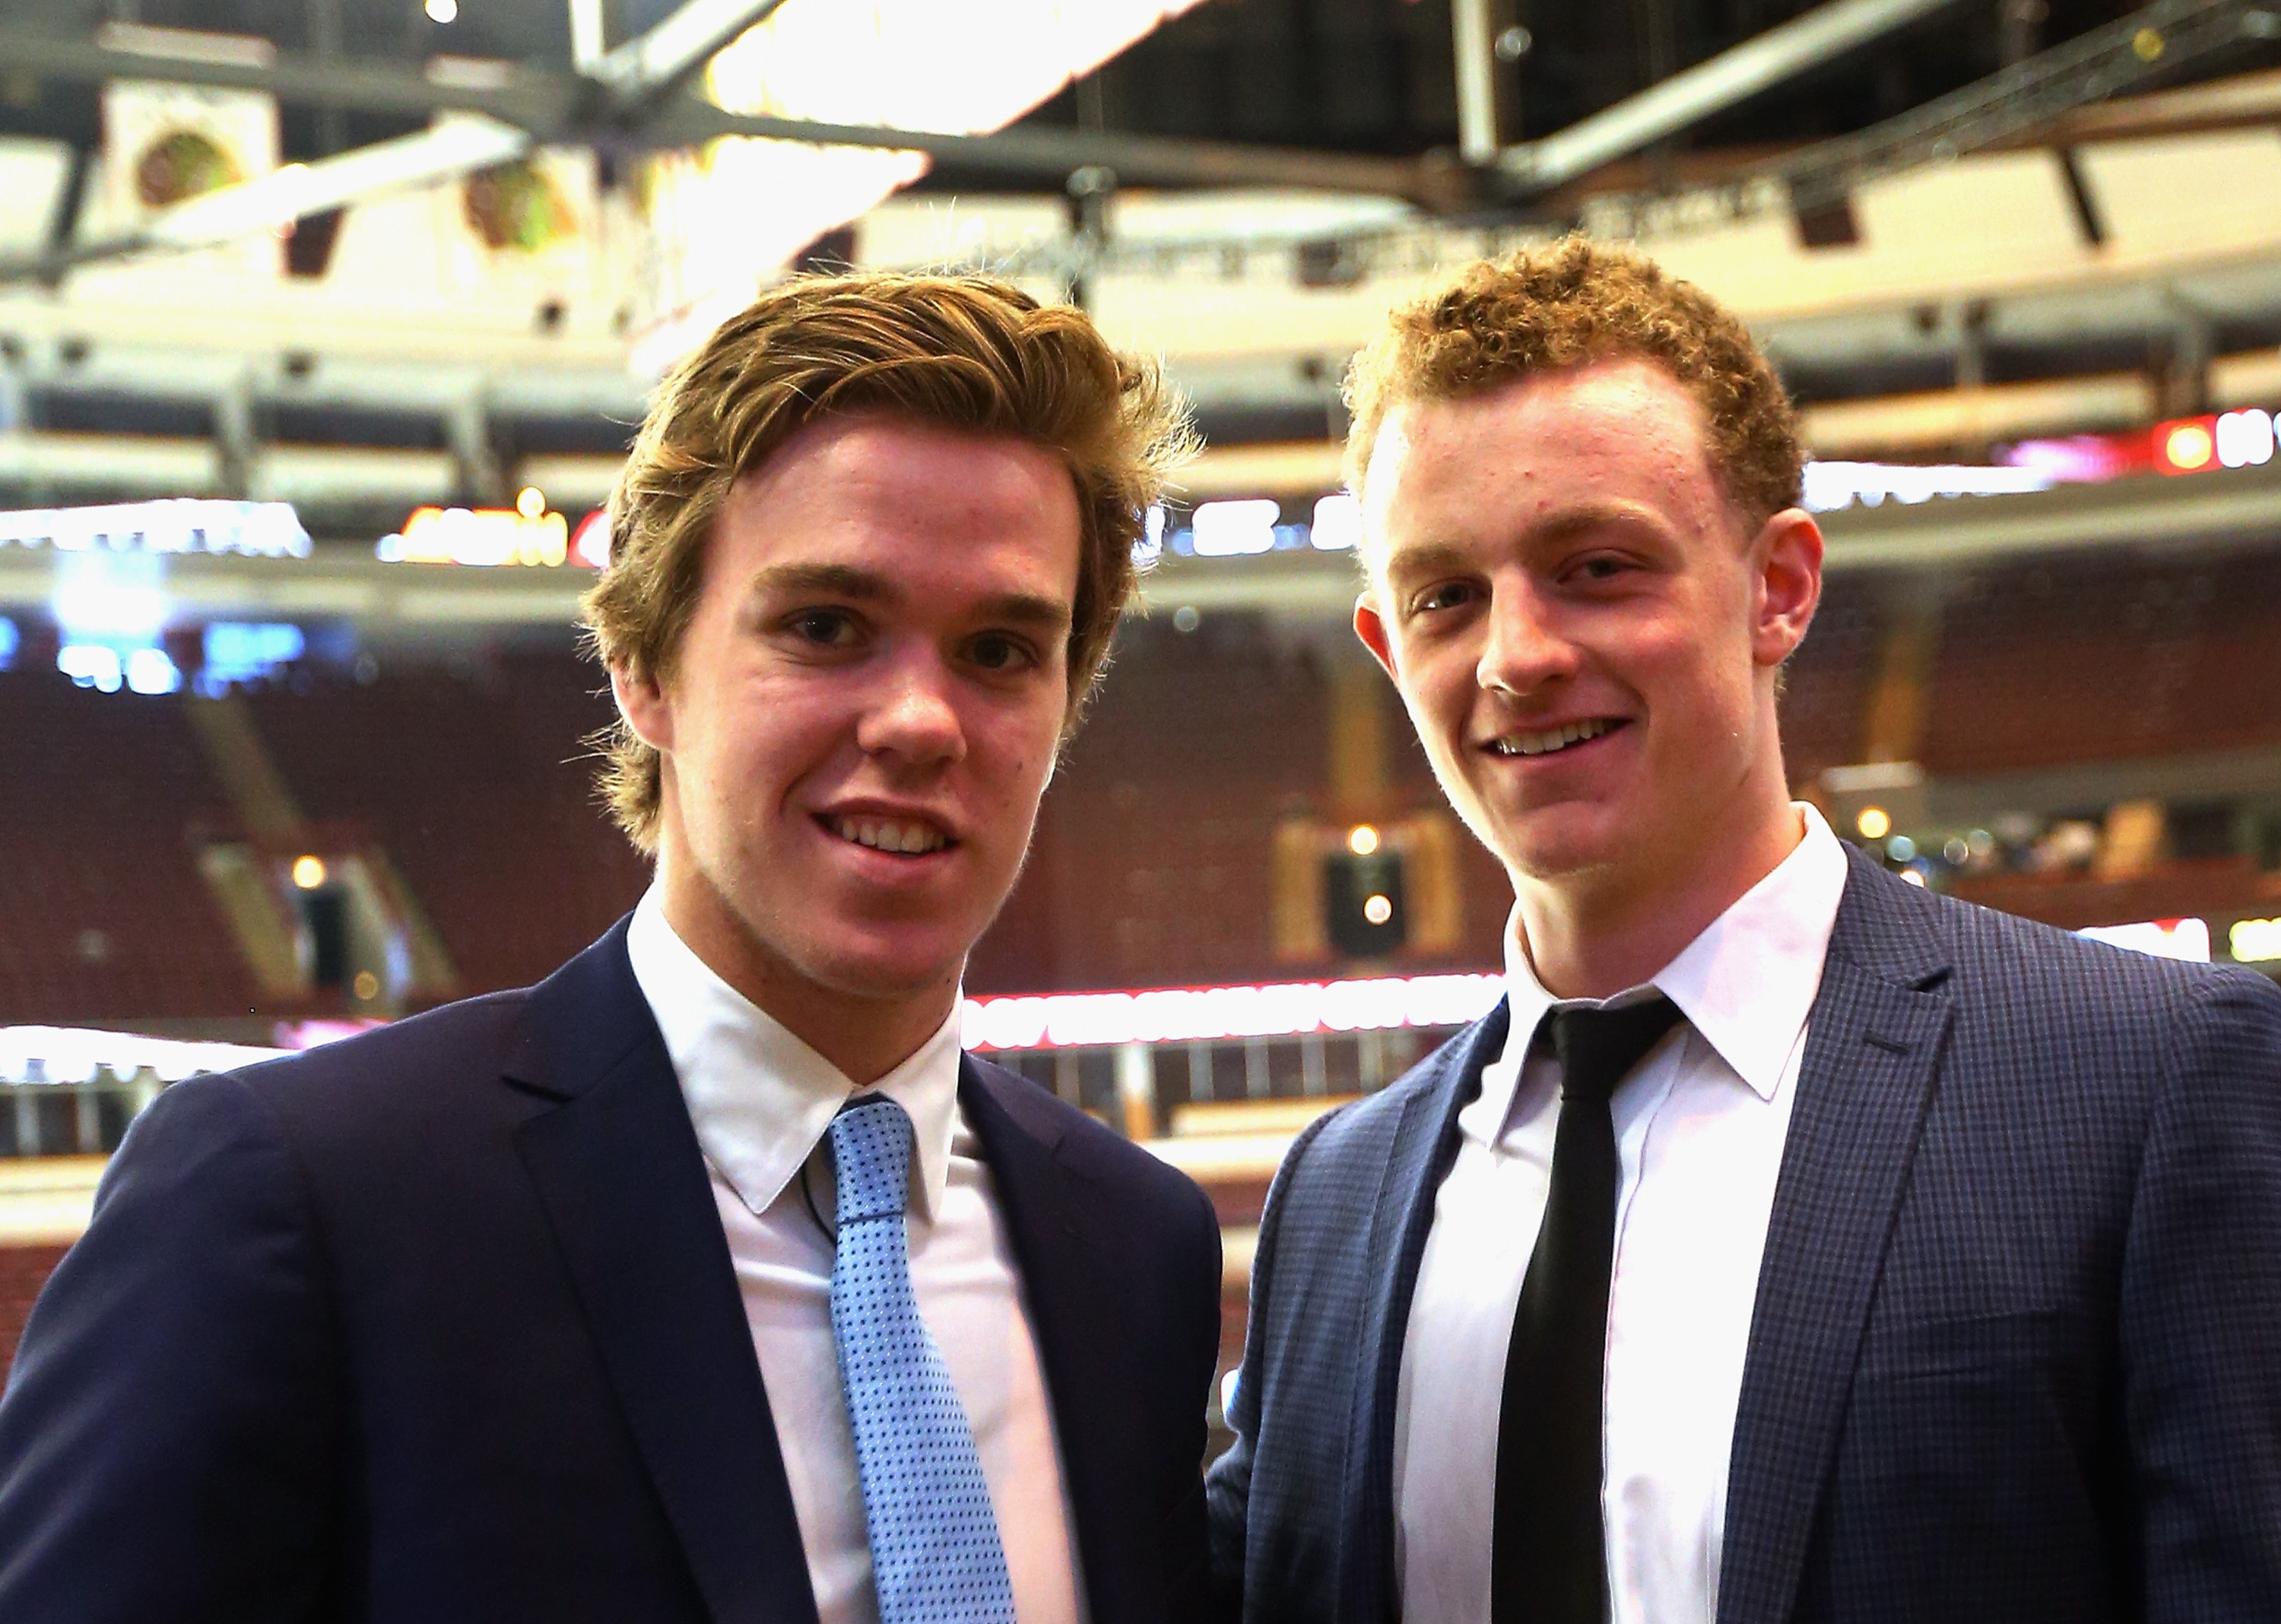 CHICAGO, IL - JUNE 08:  Upcoming NHL draft picks Connor McDavid (l) and Jack Eichel (r) take part in a  media availability at United Center on June 8, 2015 in Chicago, Illinois.  (Photo by Bruce Bennett/Getty Images)